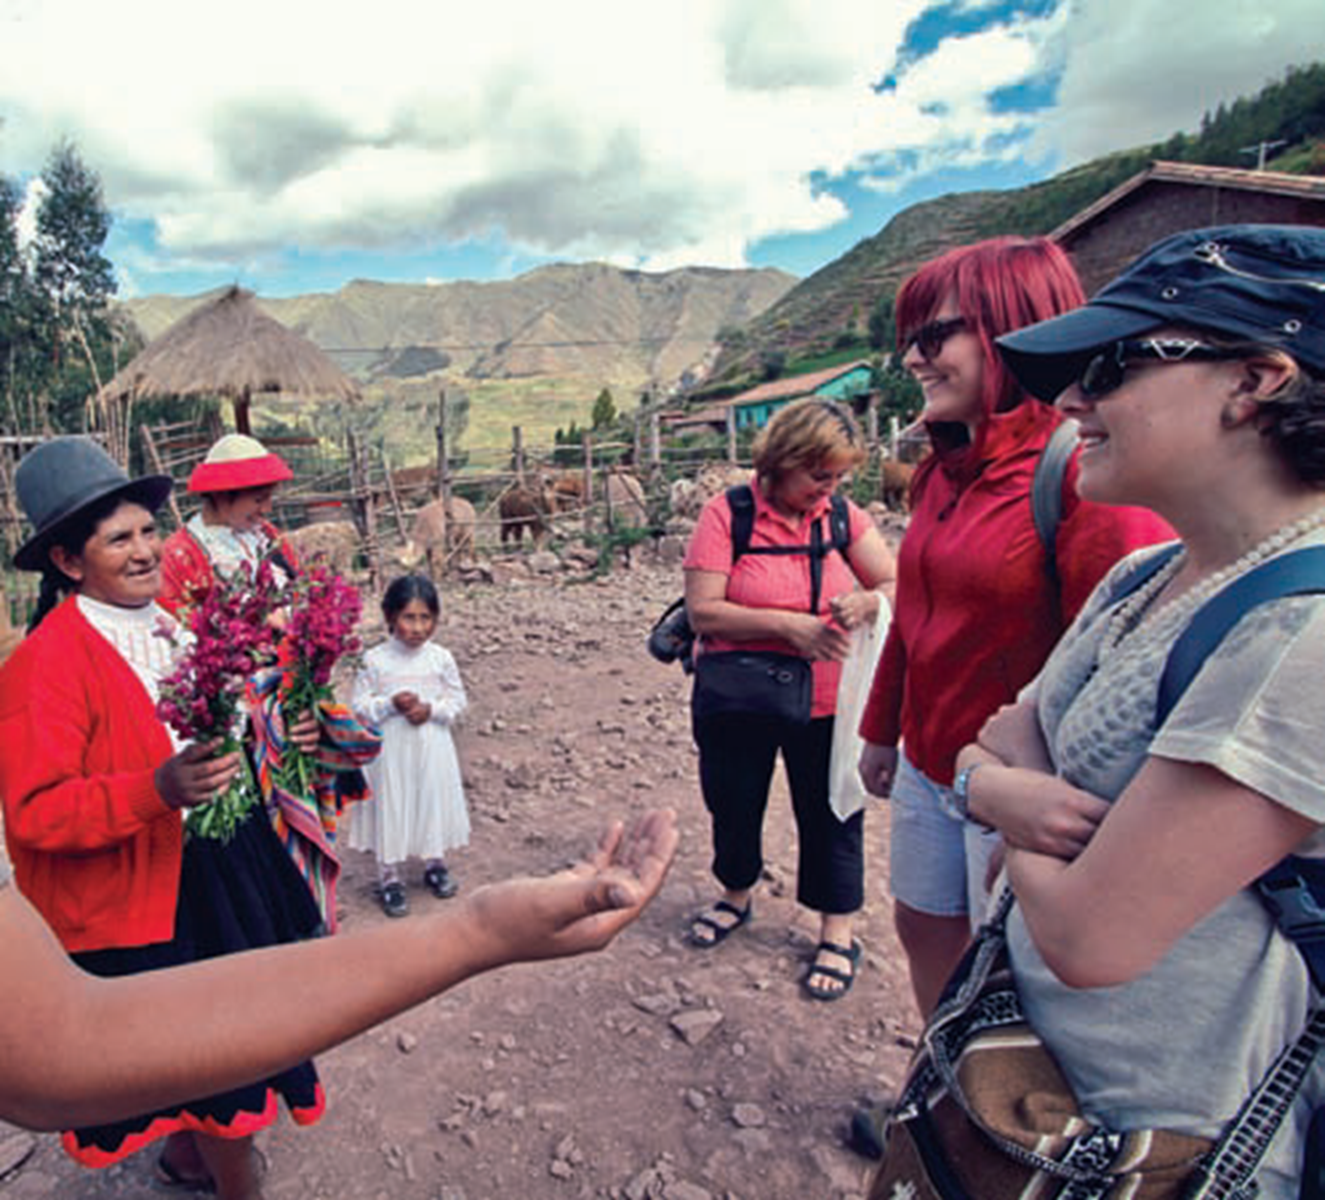 Before hiking the Inca Trail, students visit villagers in Peru’s Sacred Valley.